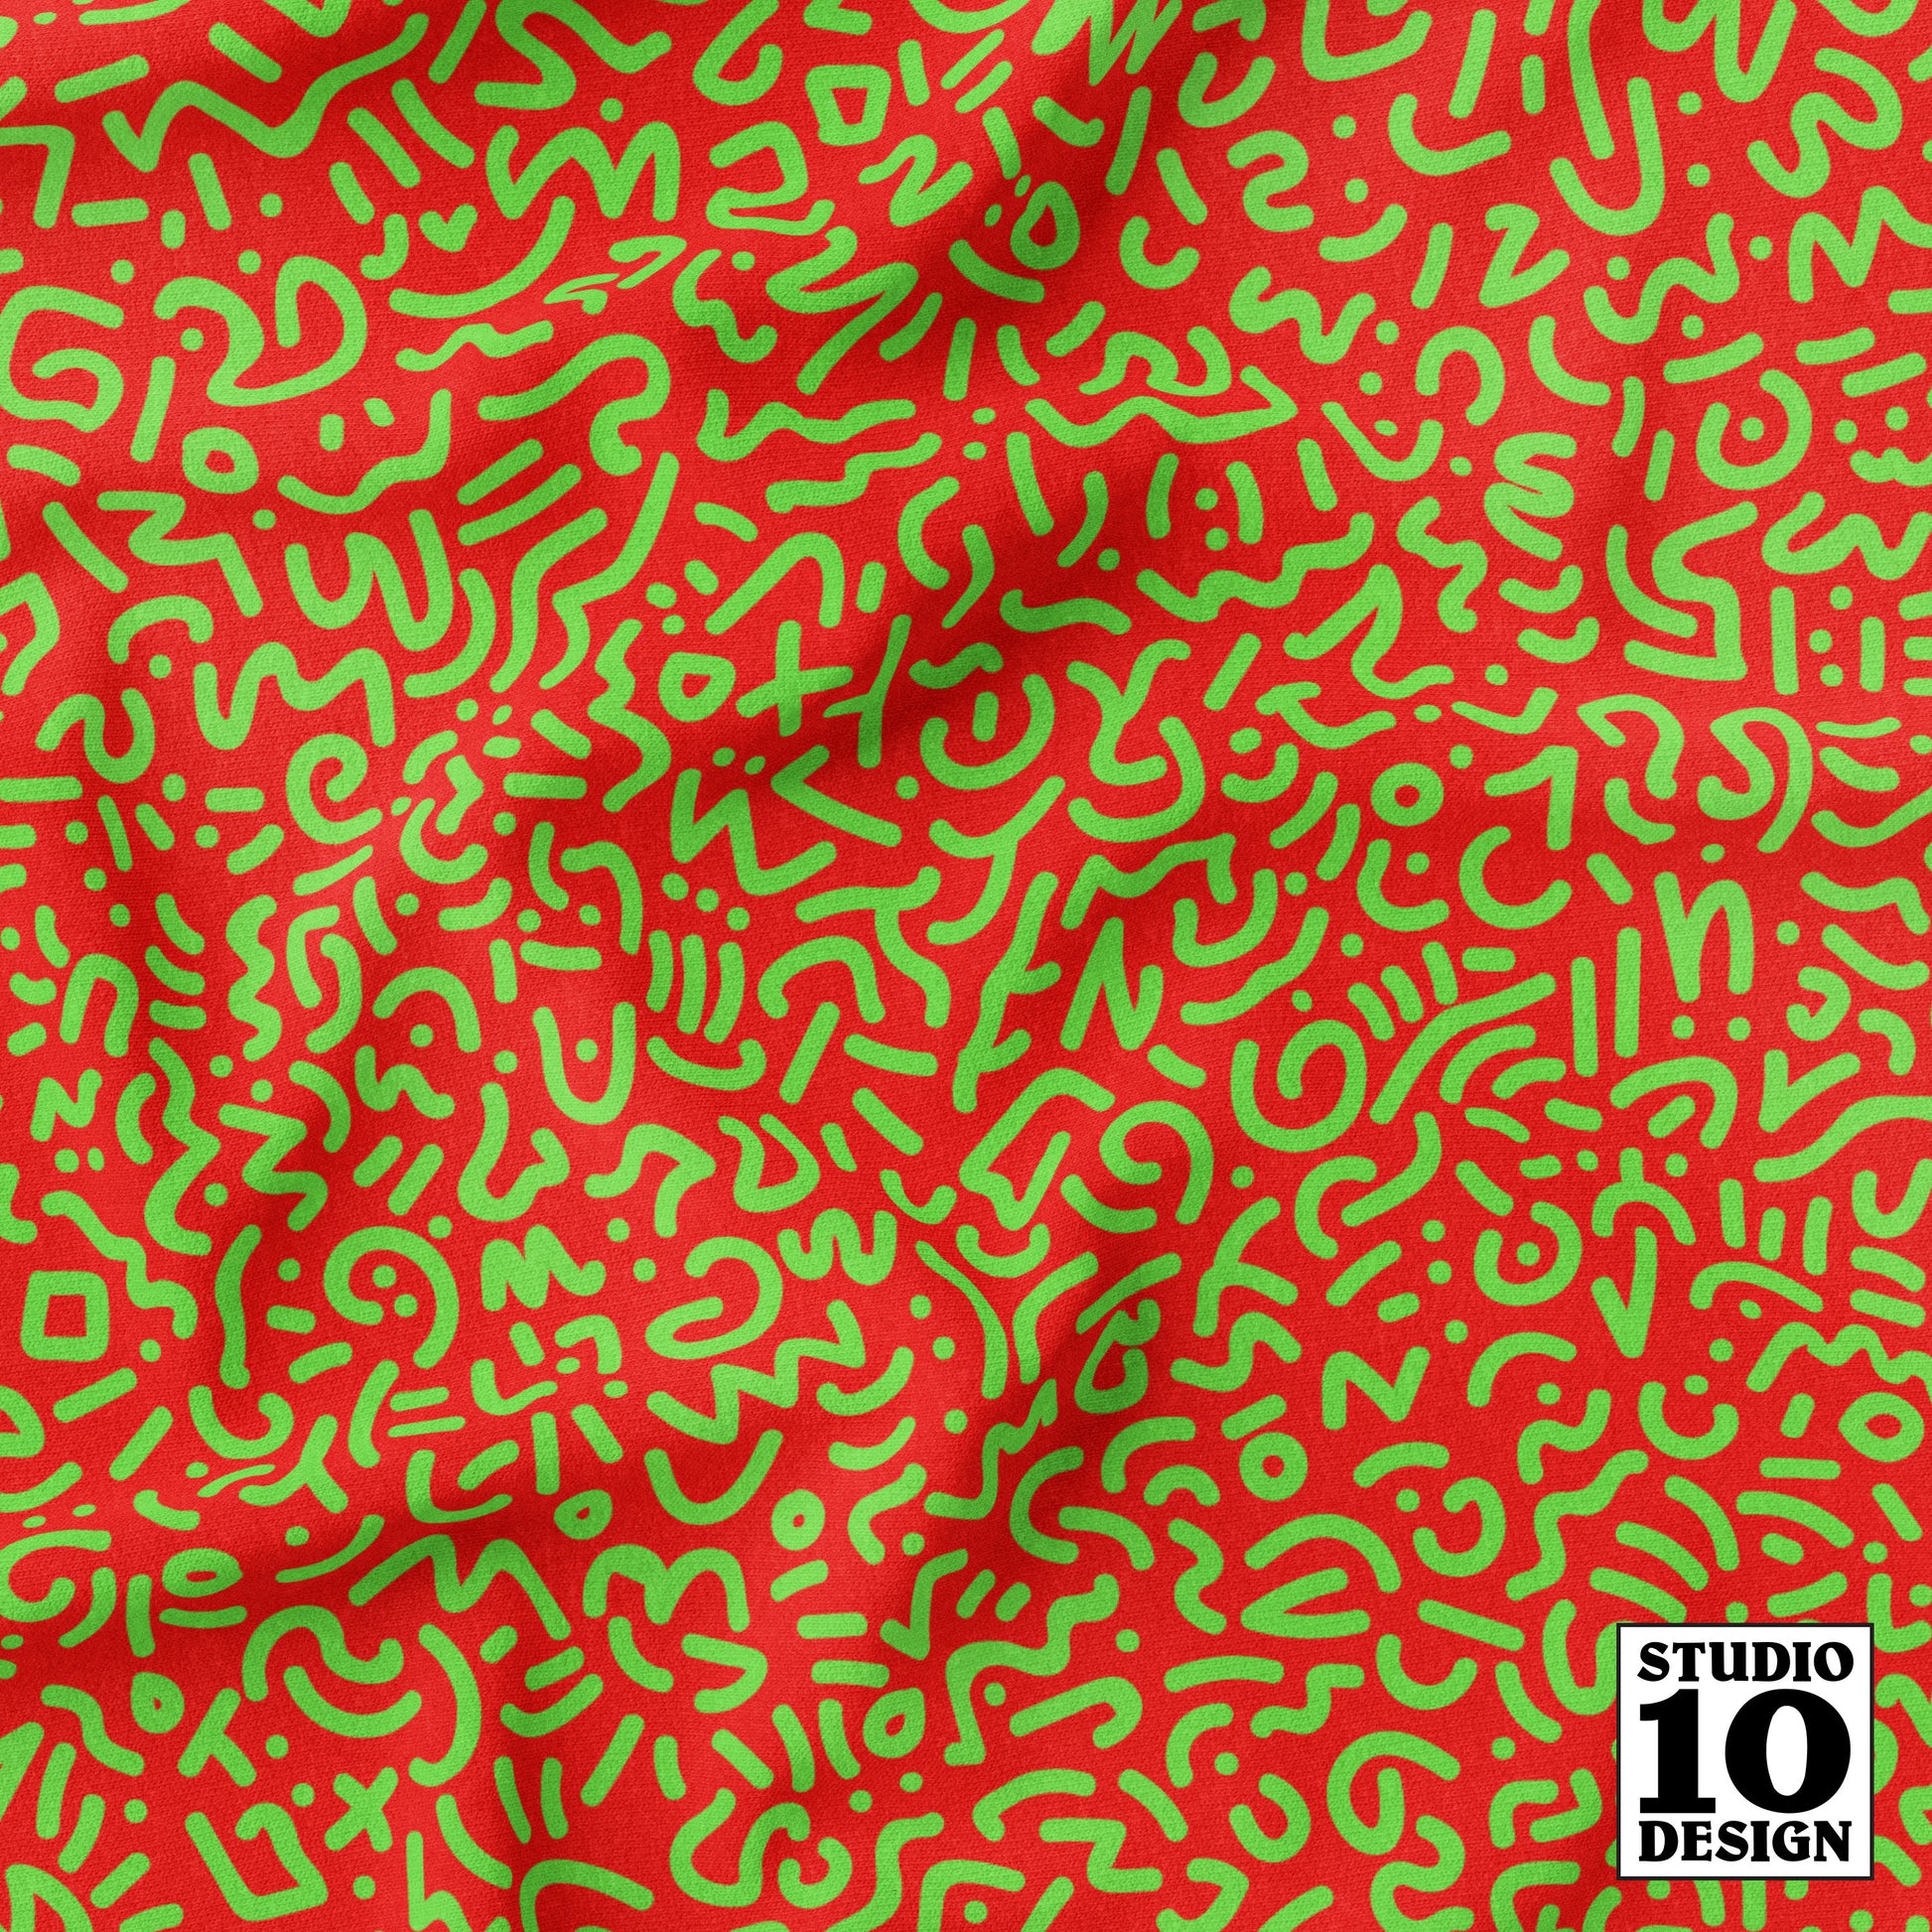 Doodle Green+Red Printed Fabric by Studio Ten Design